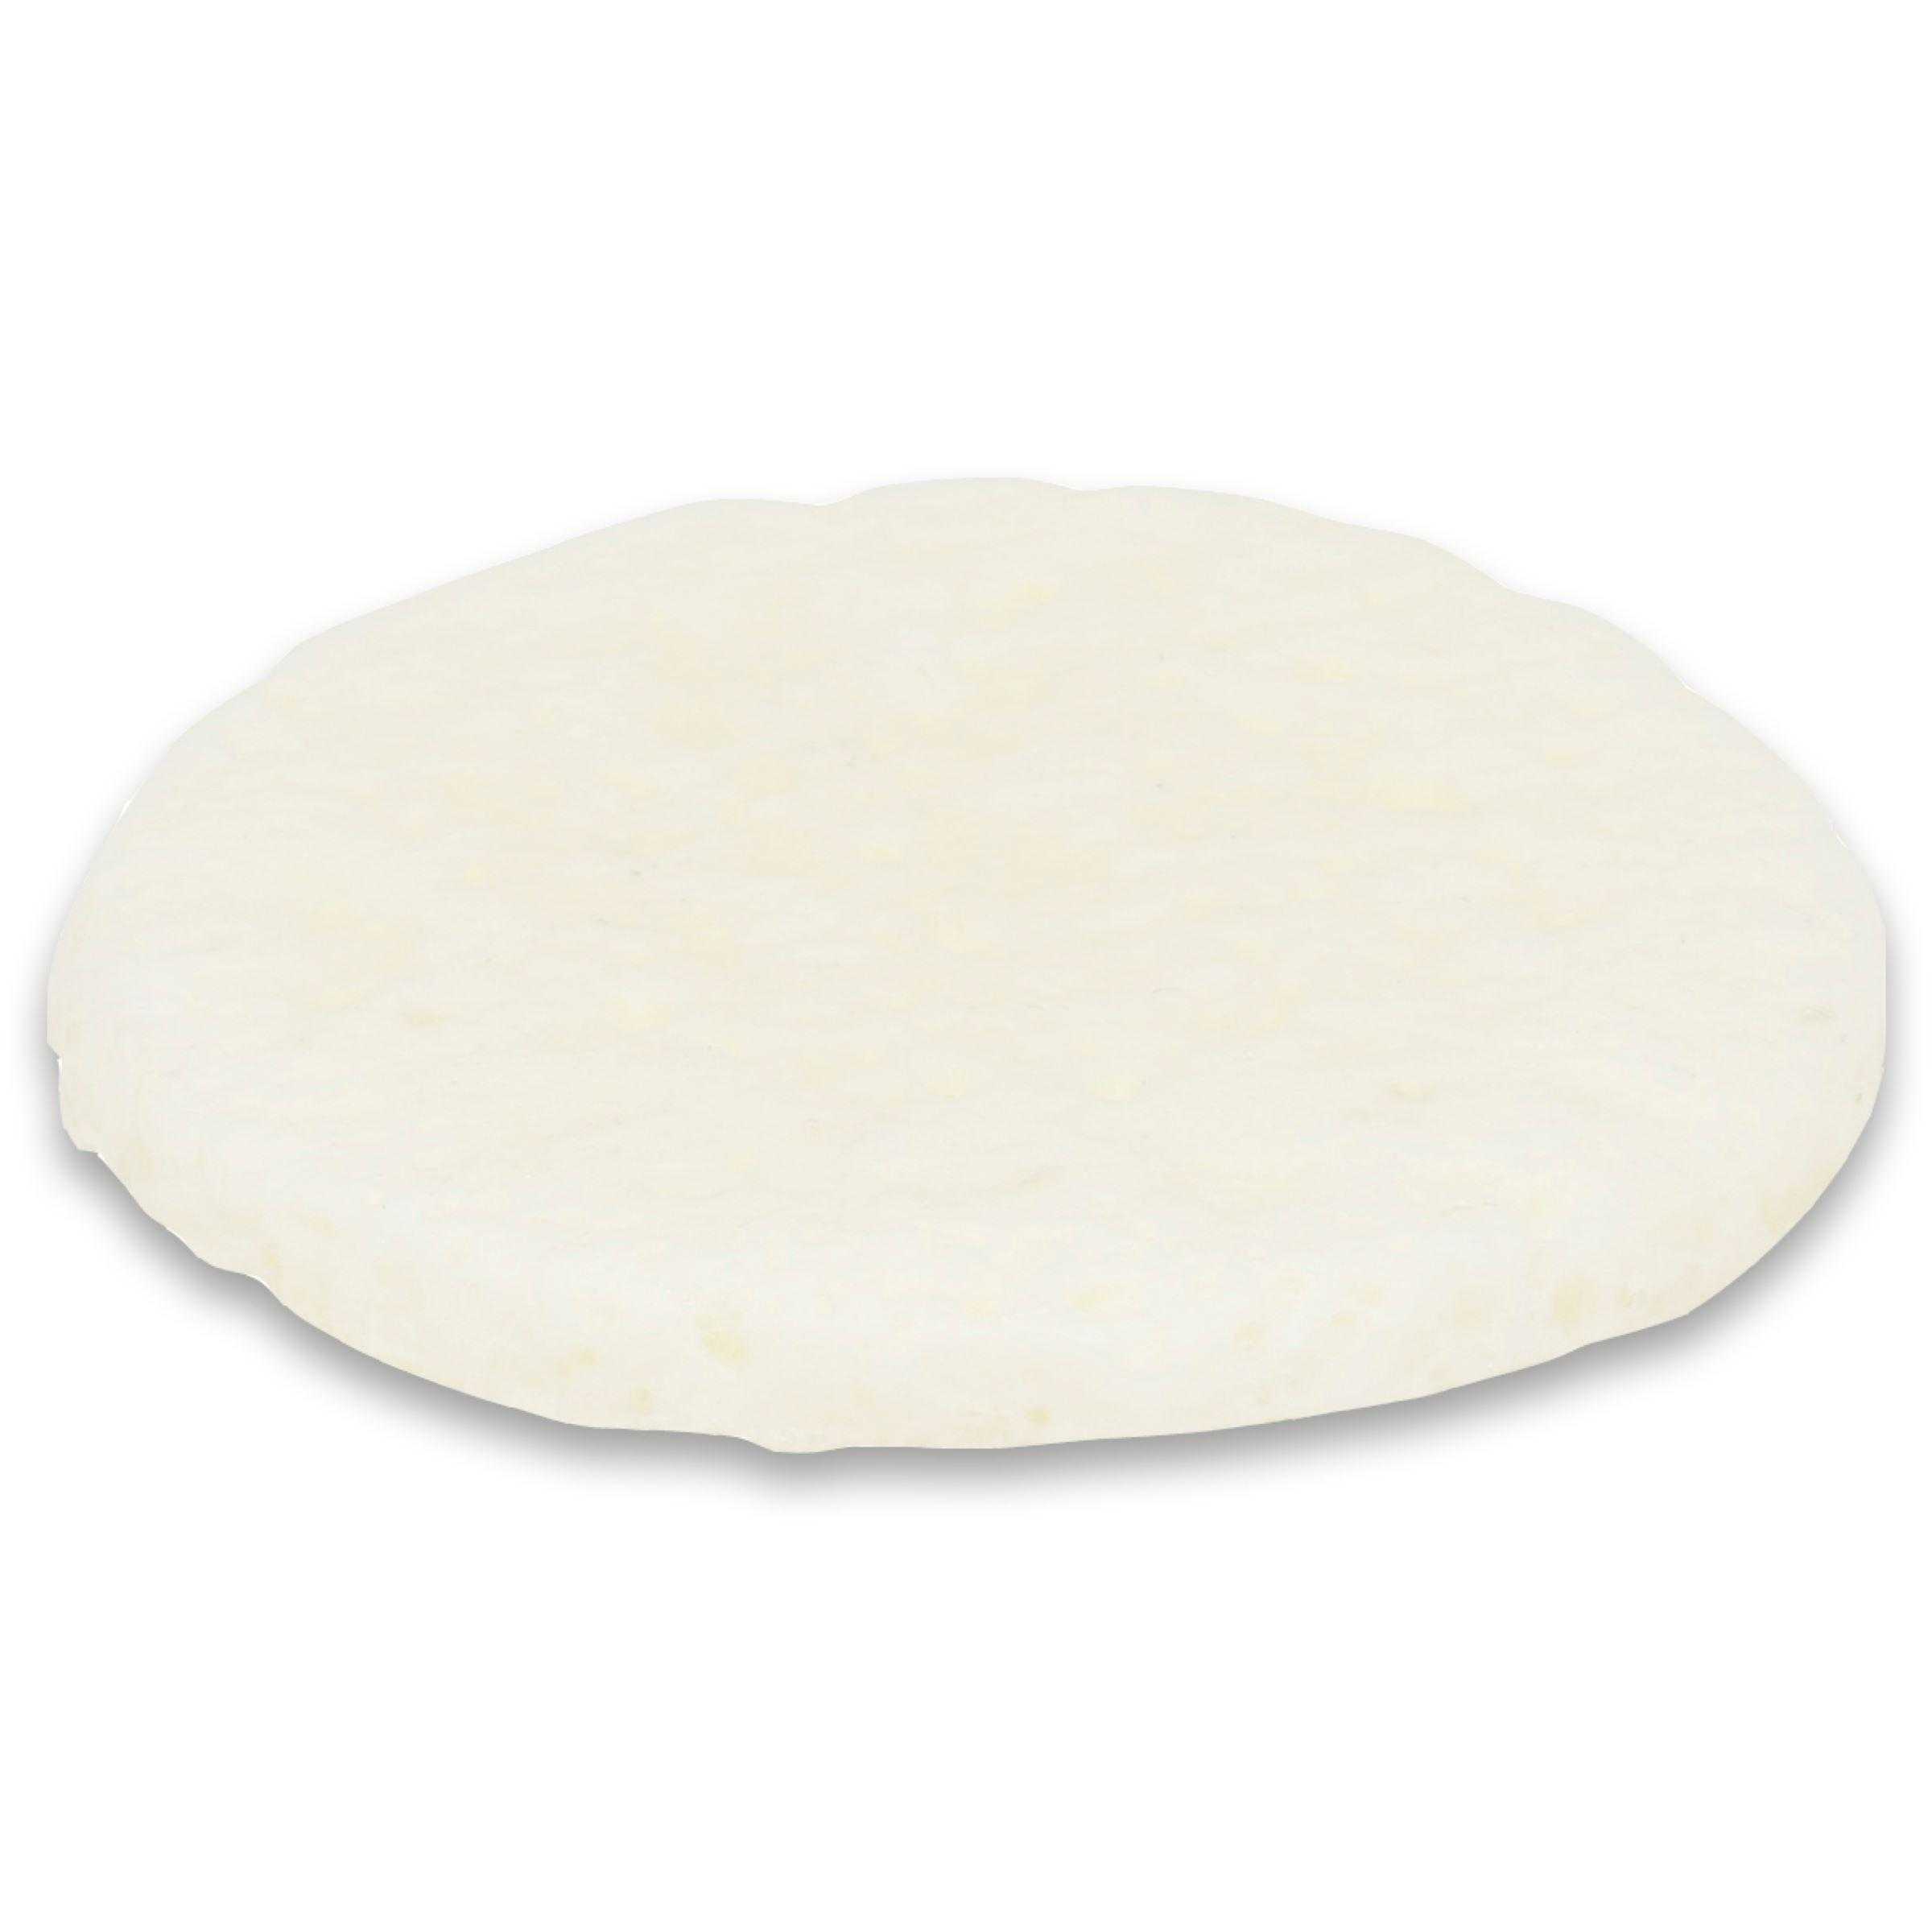 Papetti’s® Fully-Cooked 3.5” Puffed Round Egg White Patties, 153/1.3 oz